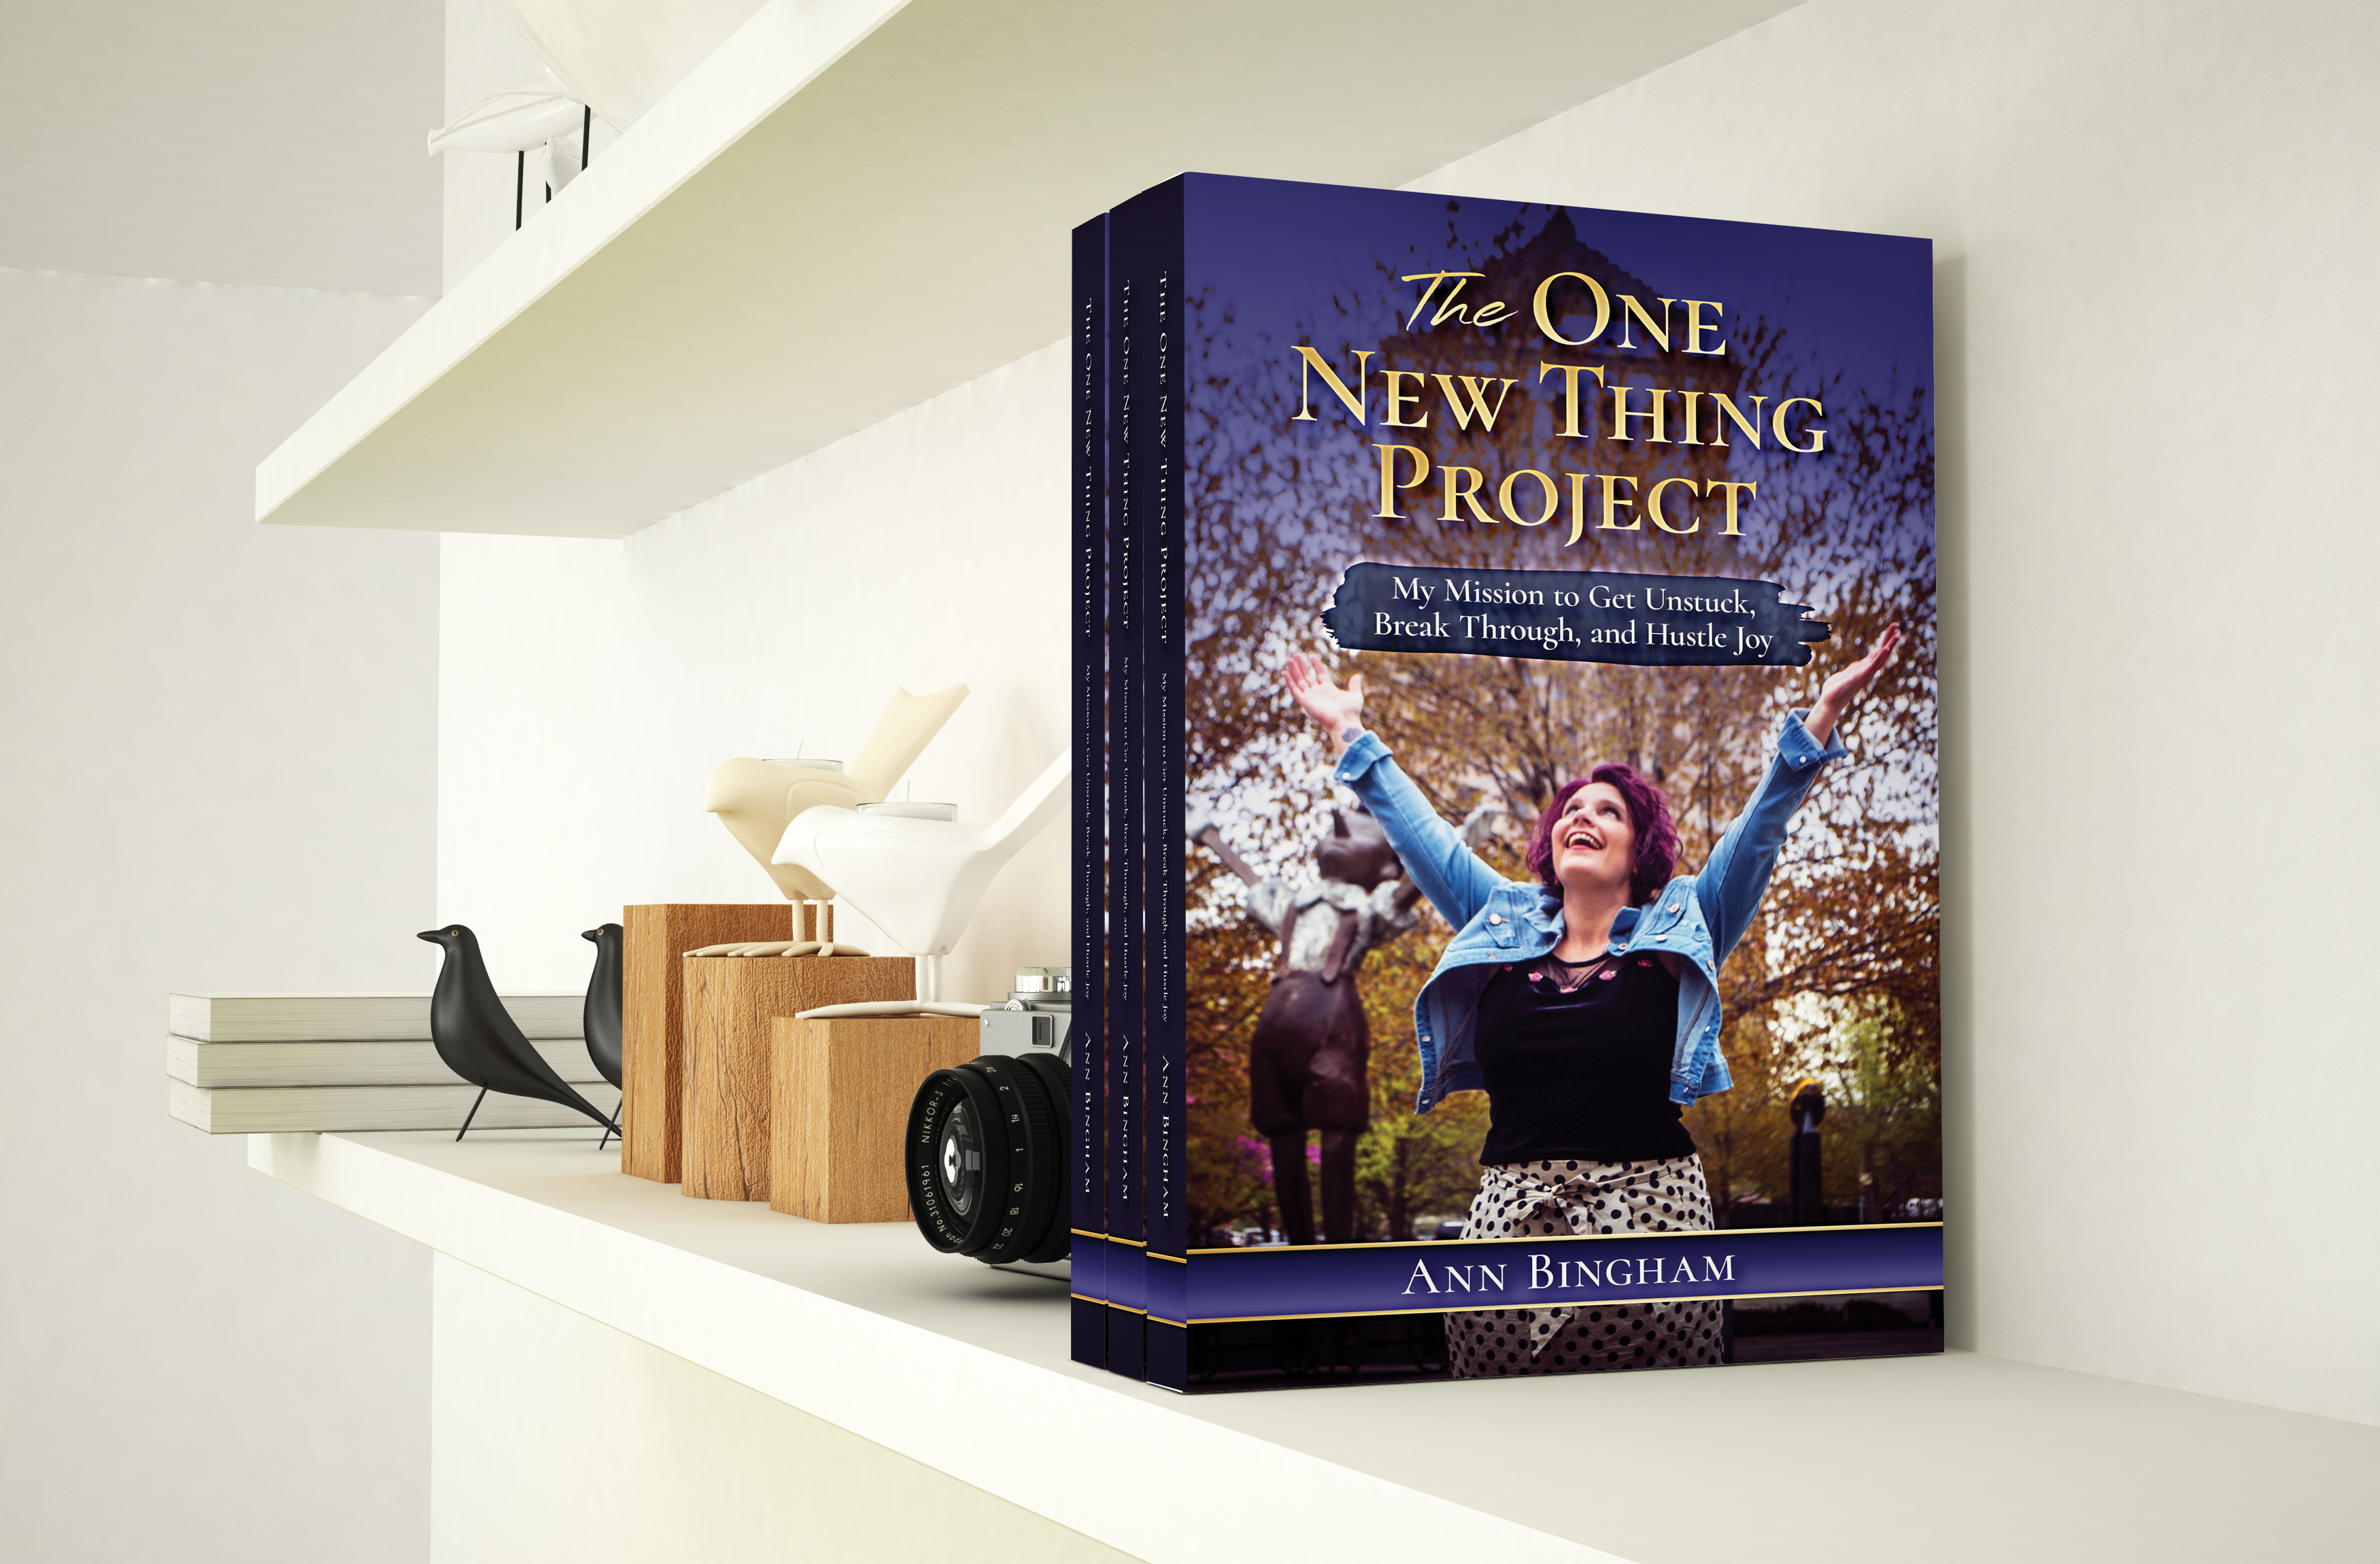 Ann Bingham launches her new book titled "The One New Thing Project", a collection of new and novel experiences of the Author